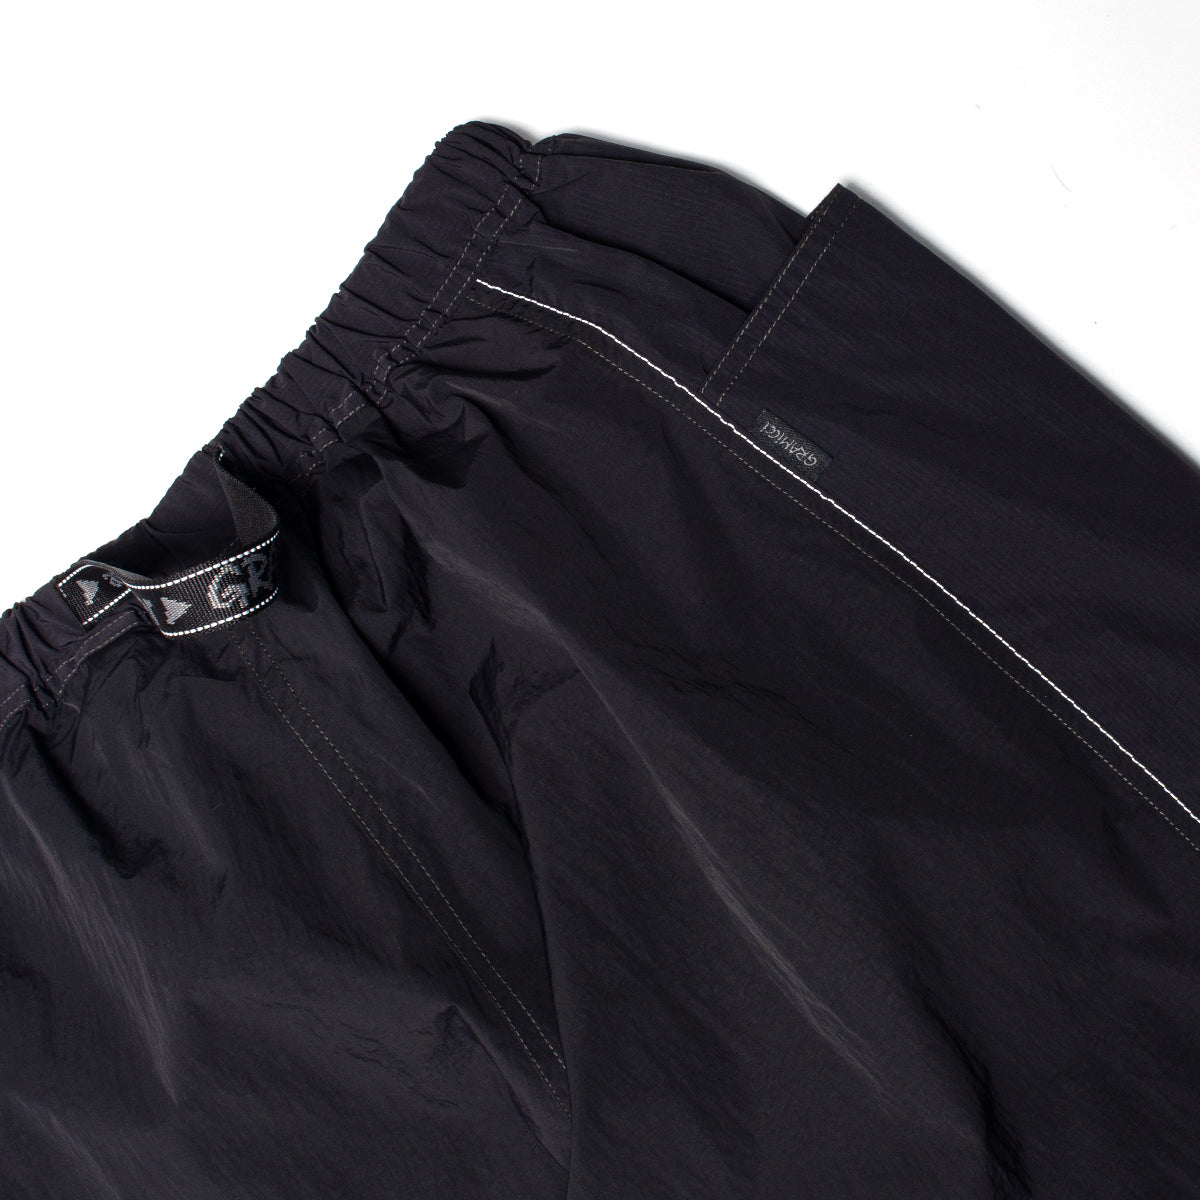 Grammici x and Wander | Patchwork Wind Pant Black